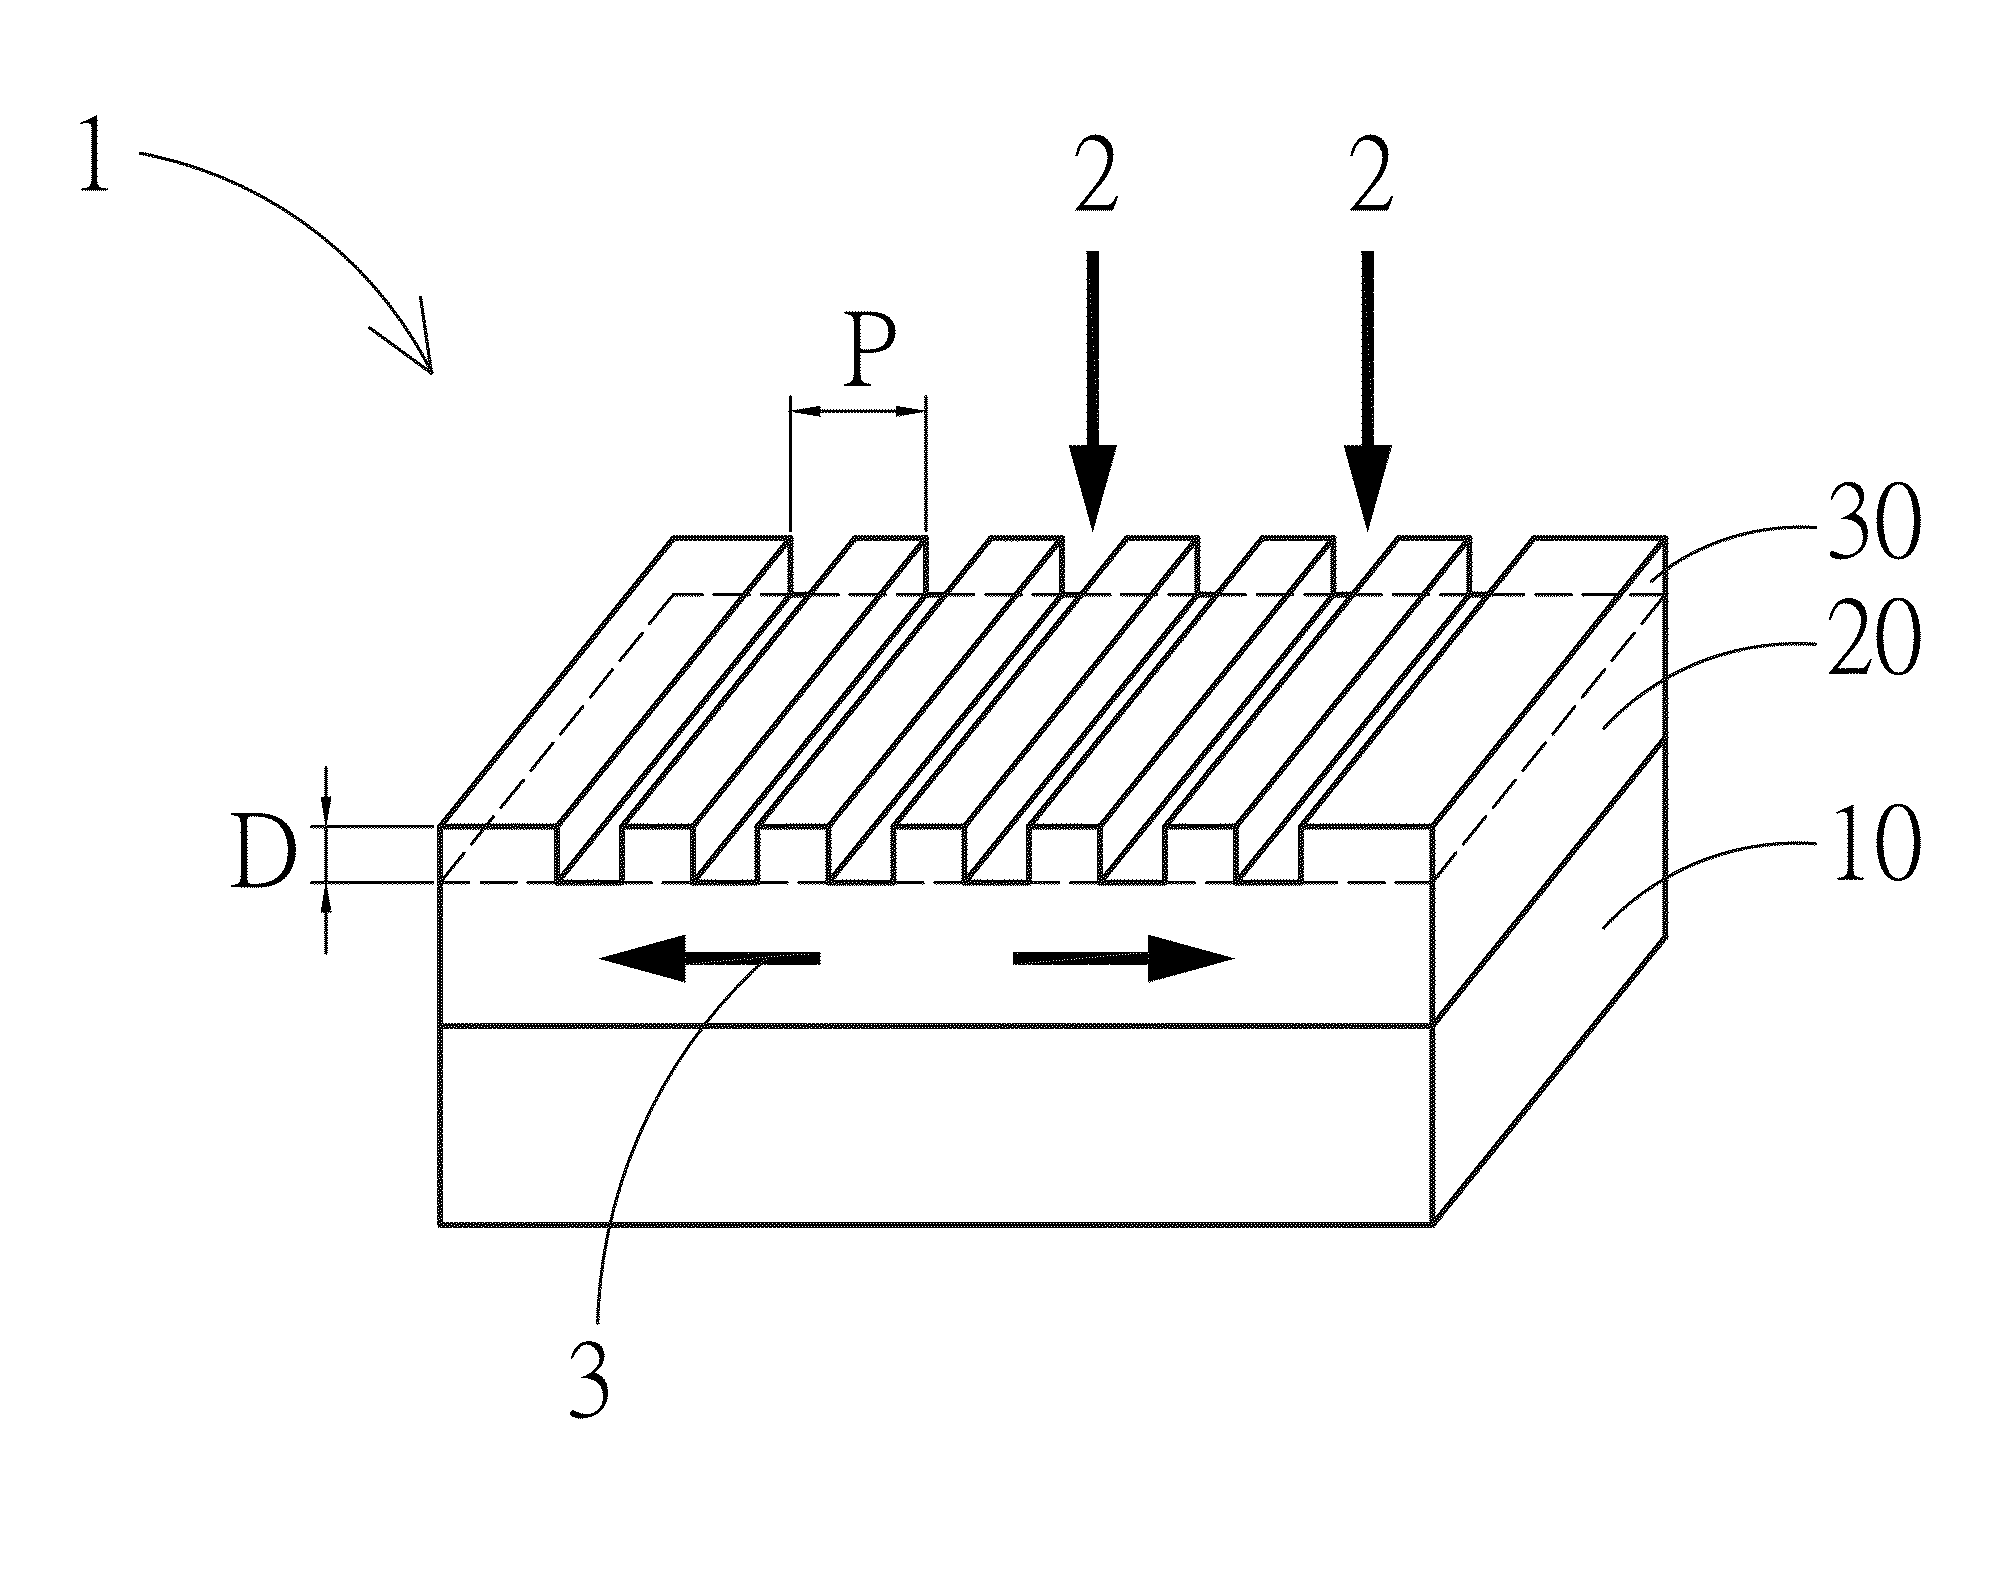 Optoelectronic device having surface periodic grating structure